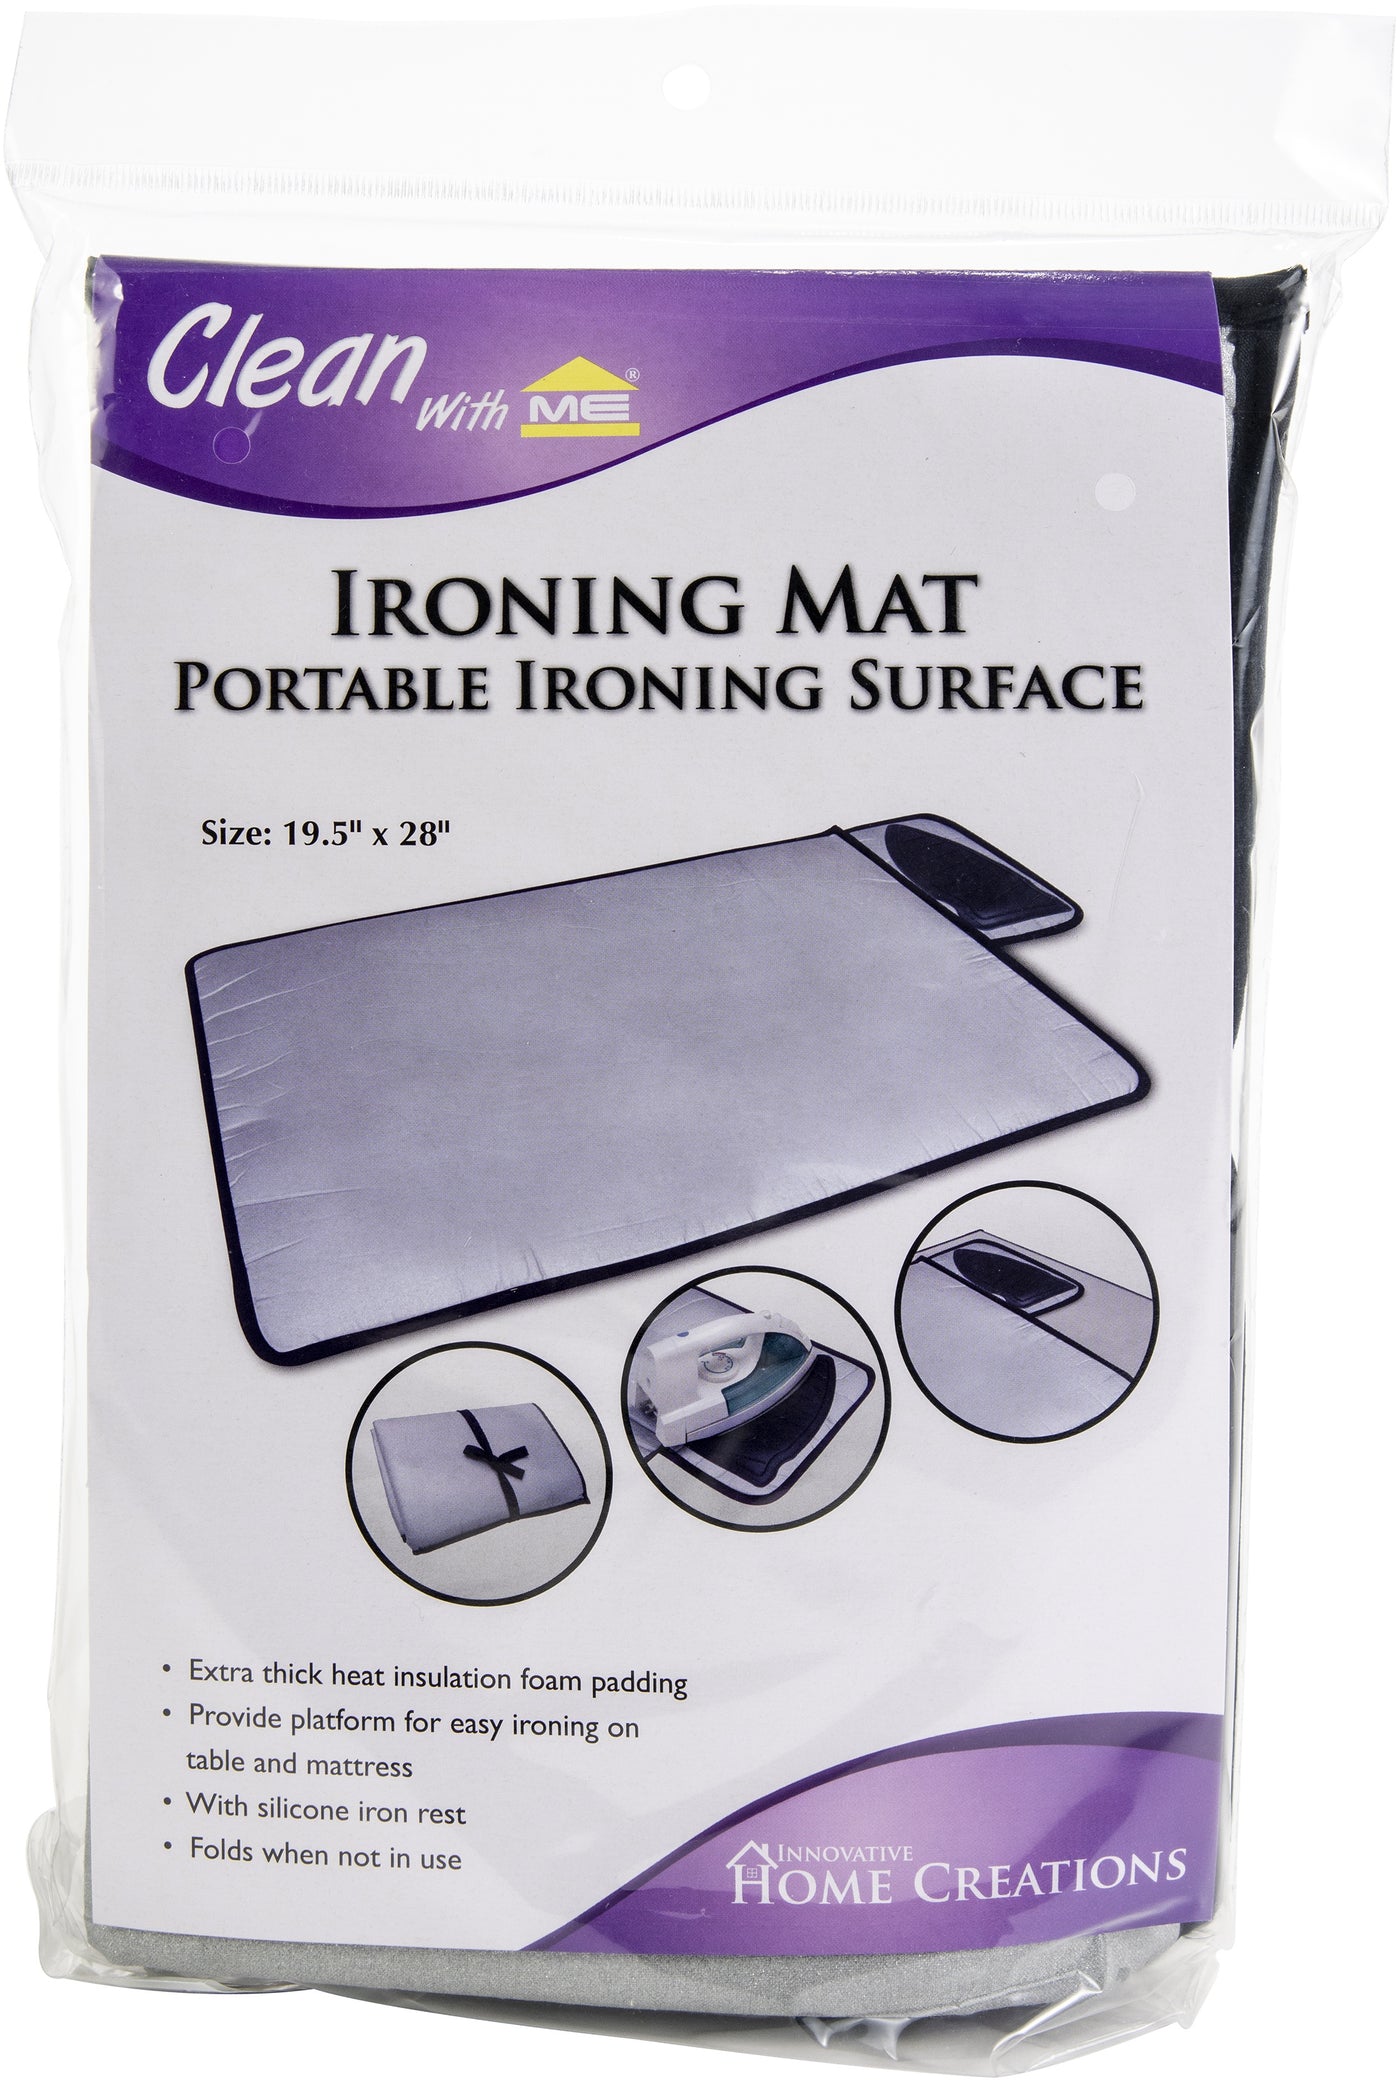 Innovative Home Creations Ironing Mat W/Silicone Pad-19.5"X28"